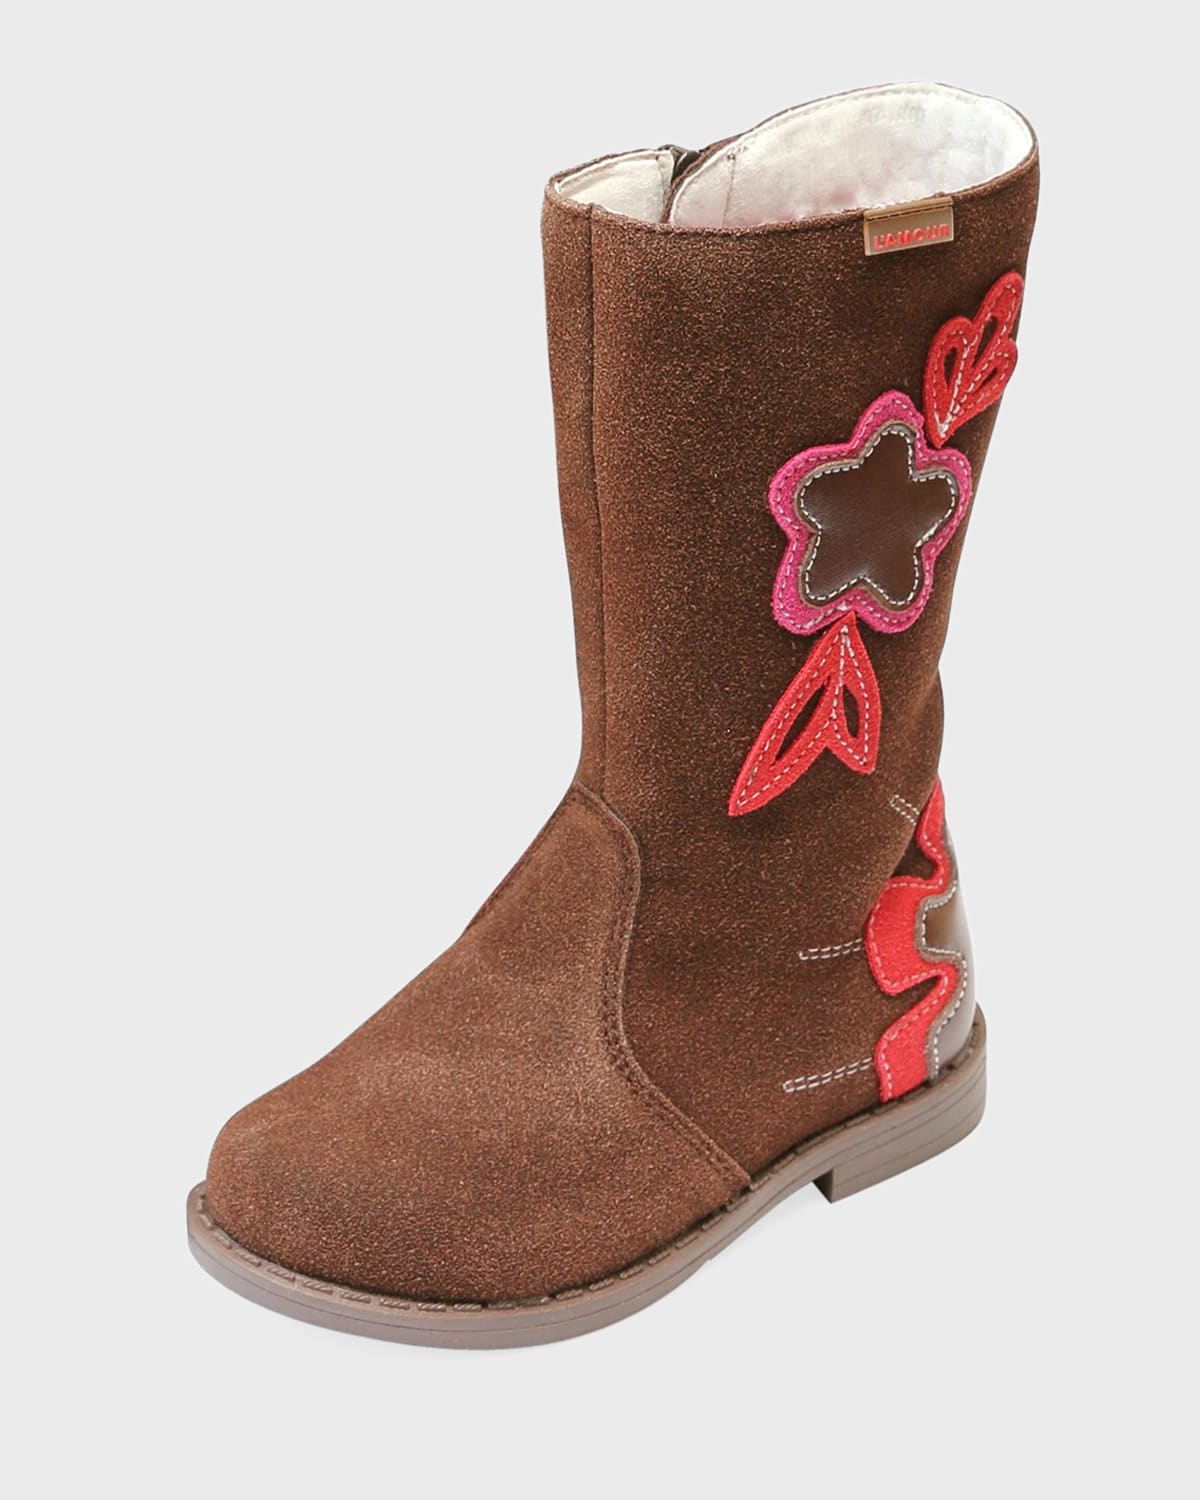 L'amour Shoes Fiore Tall Fashion Boot W/ Stitch Flowers, Baby/toddler/kids In Brown